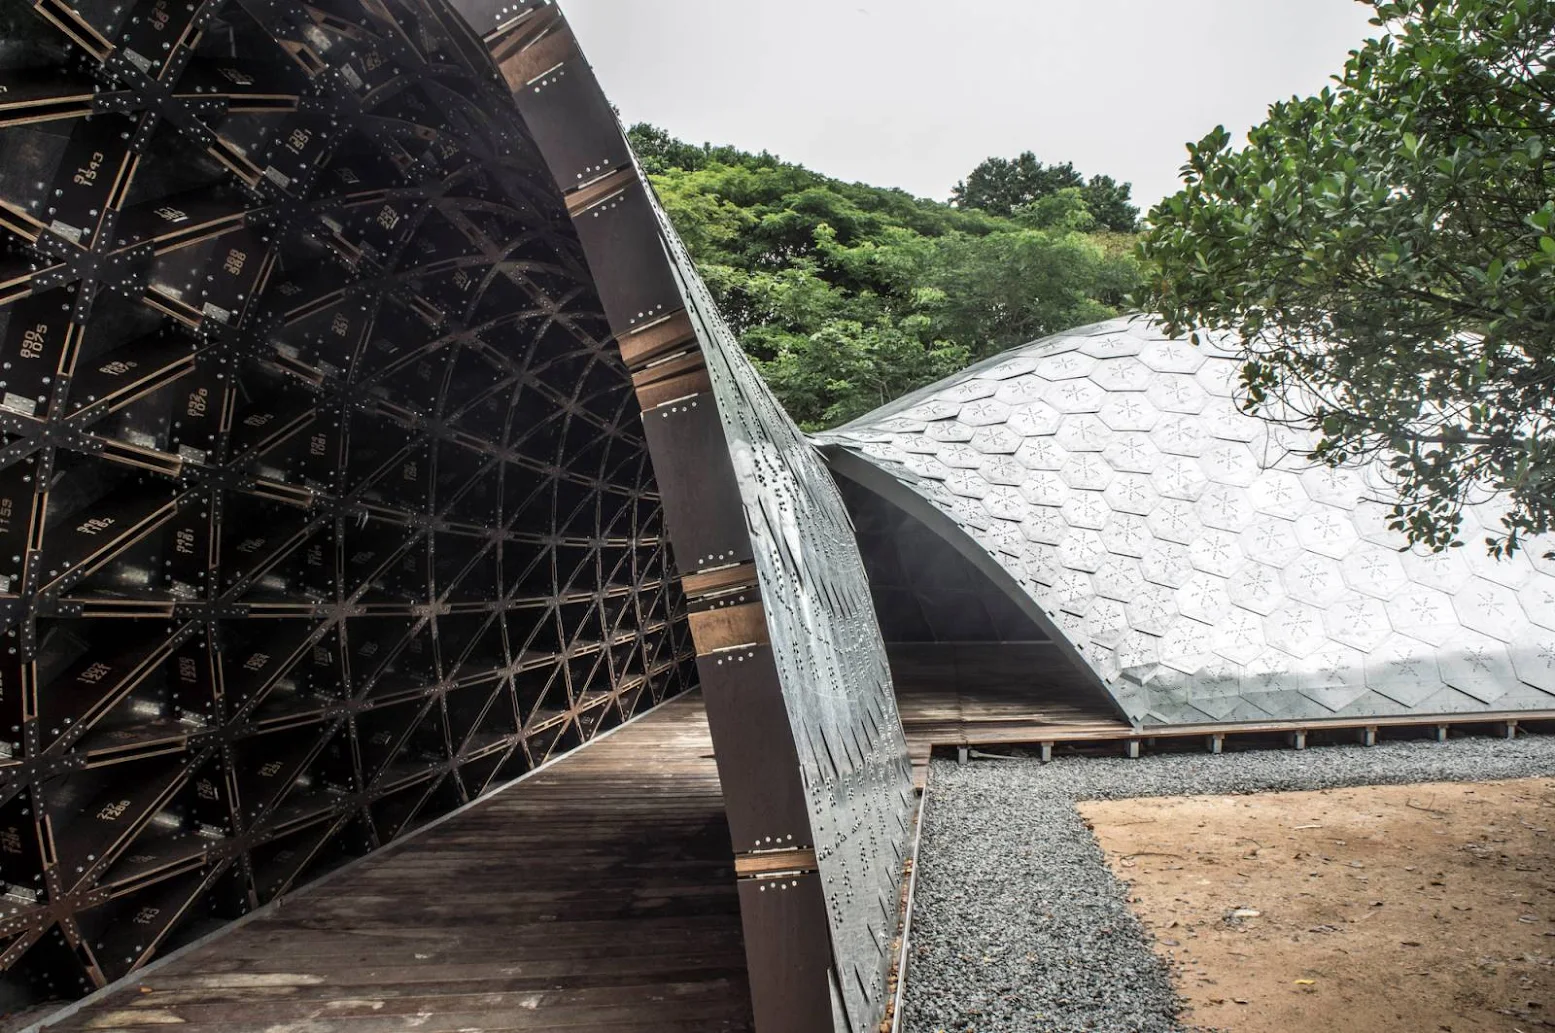 SUTD Library Gridshell Pavilion by City Form Lab